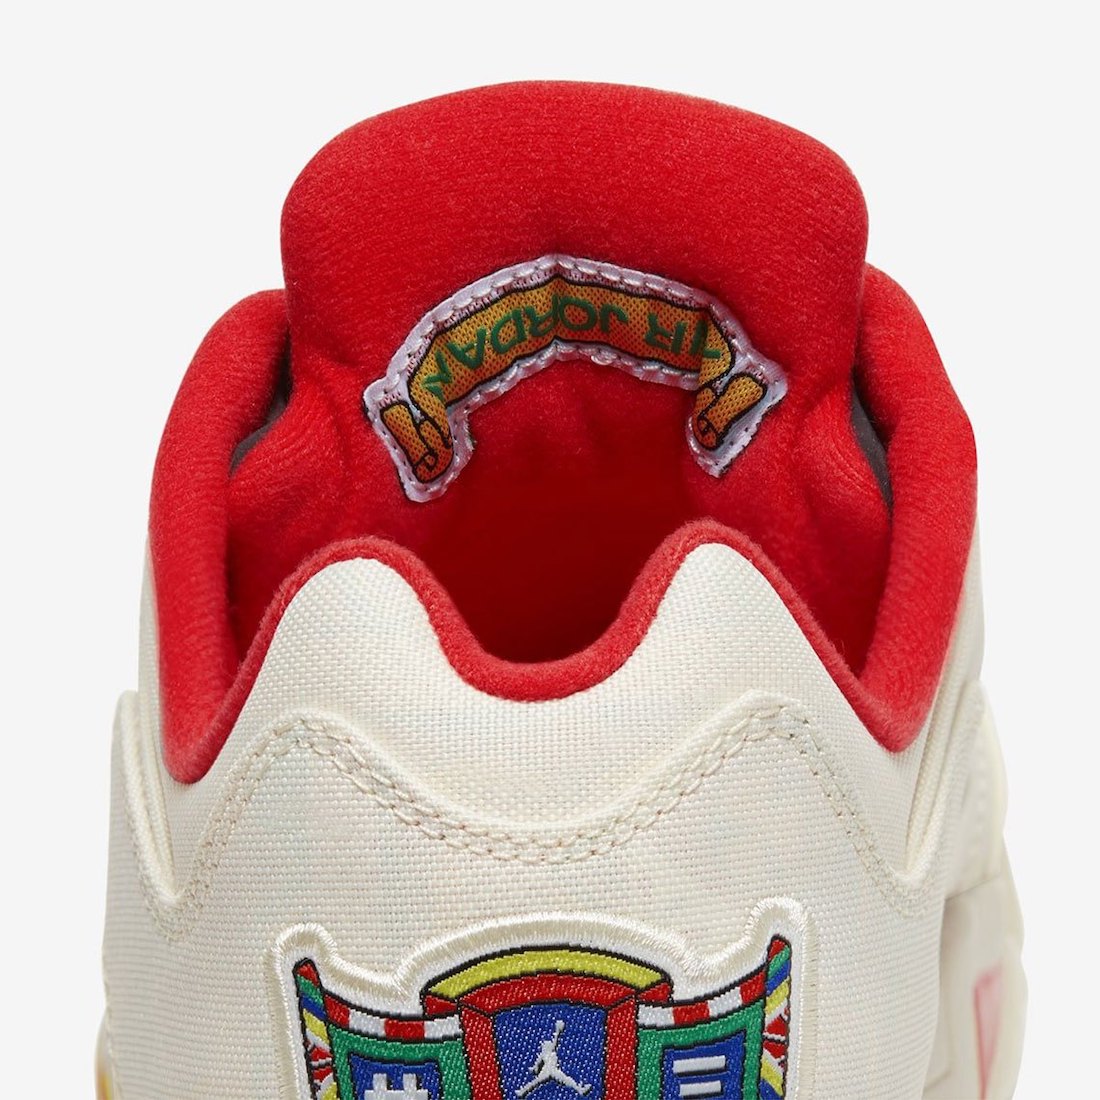 Air-Jordan-5-Low-CNY-Chinese-New-Year-DD2240-100-Release-Date-6